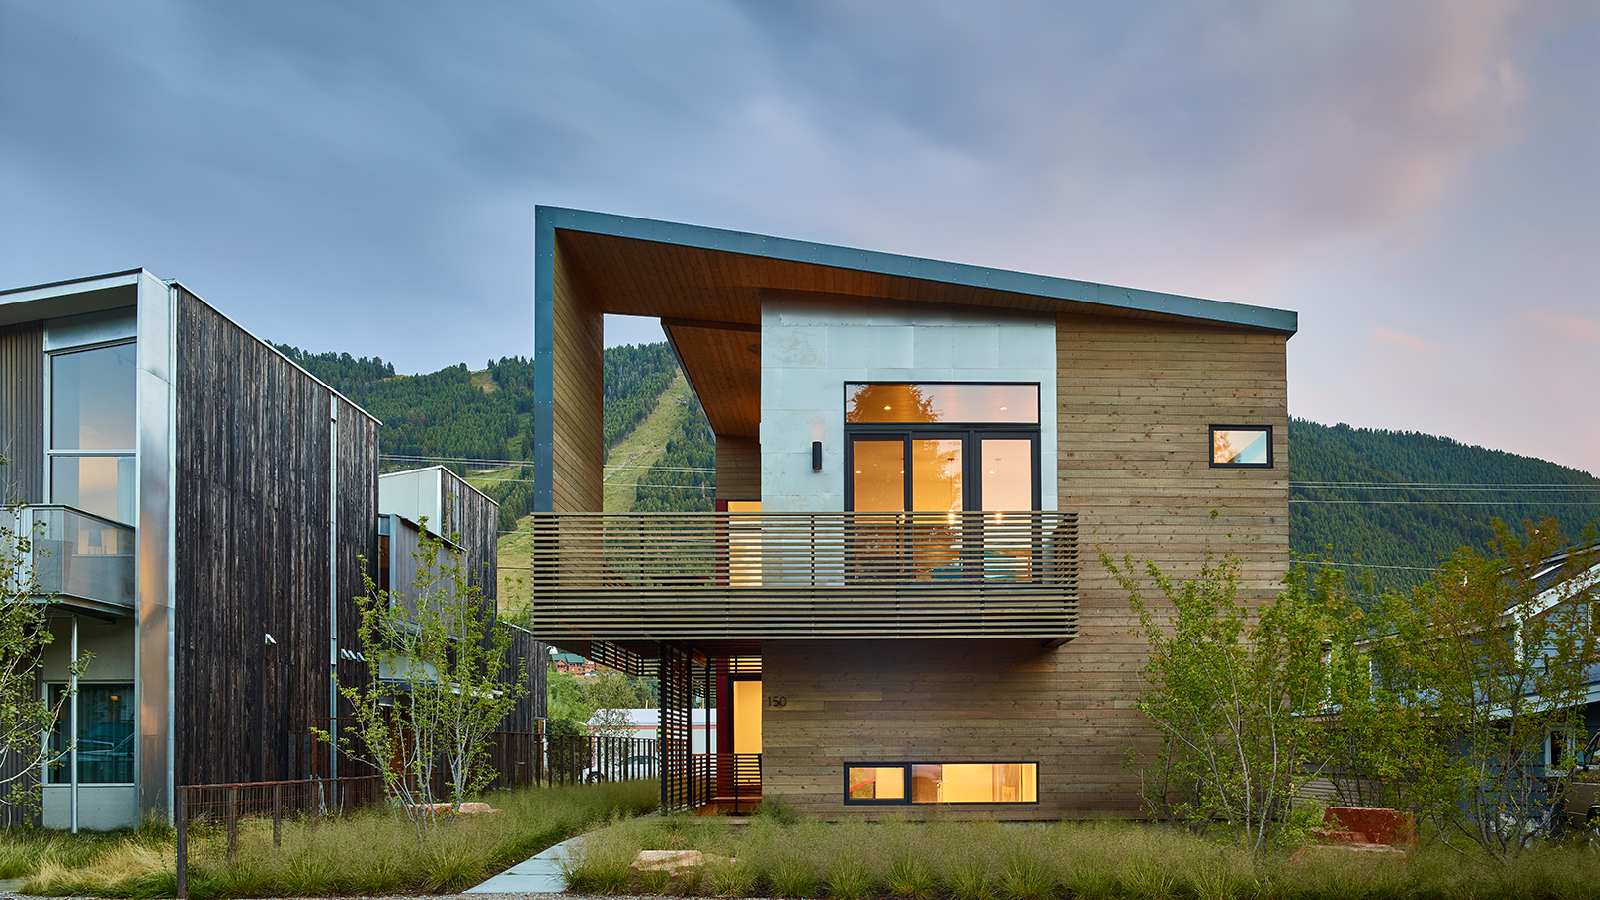 Exterior view of West Hansen, a custom home designed and built by Farmer Payne Architects.